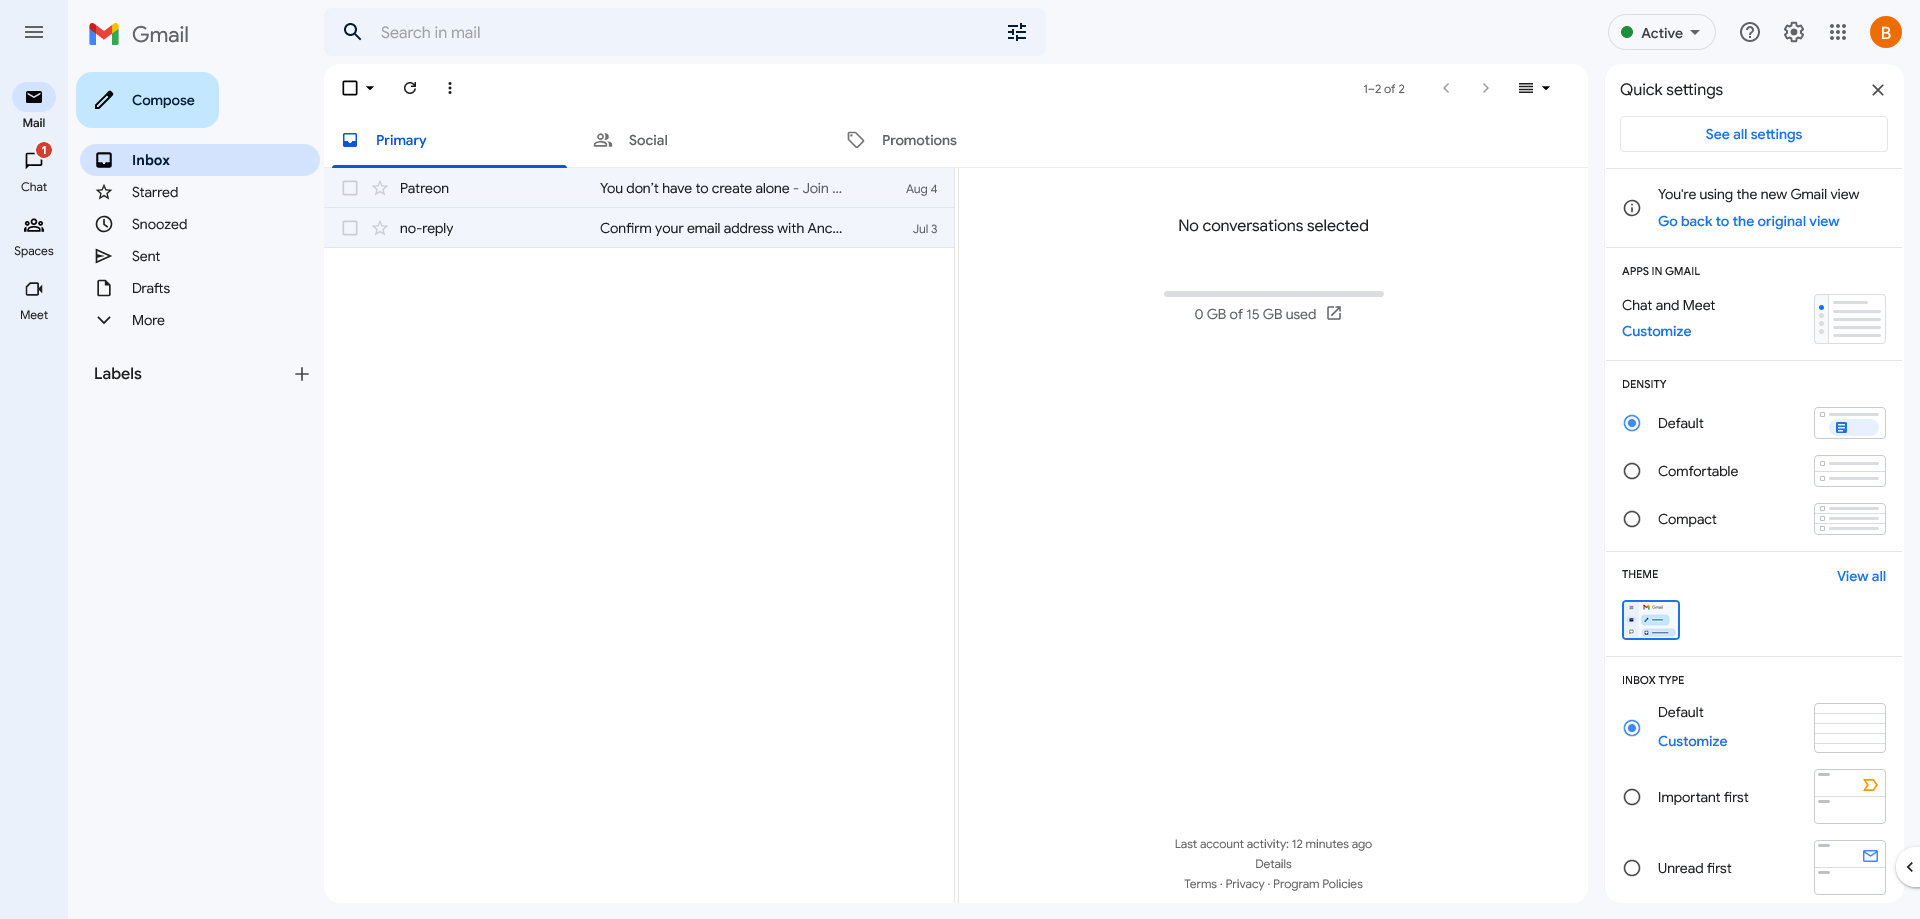 Quick settings menu in the Gmail's new 2022 design